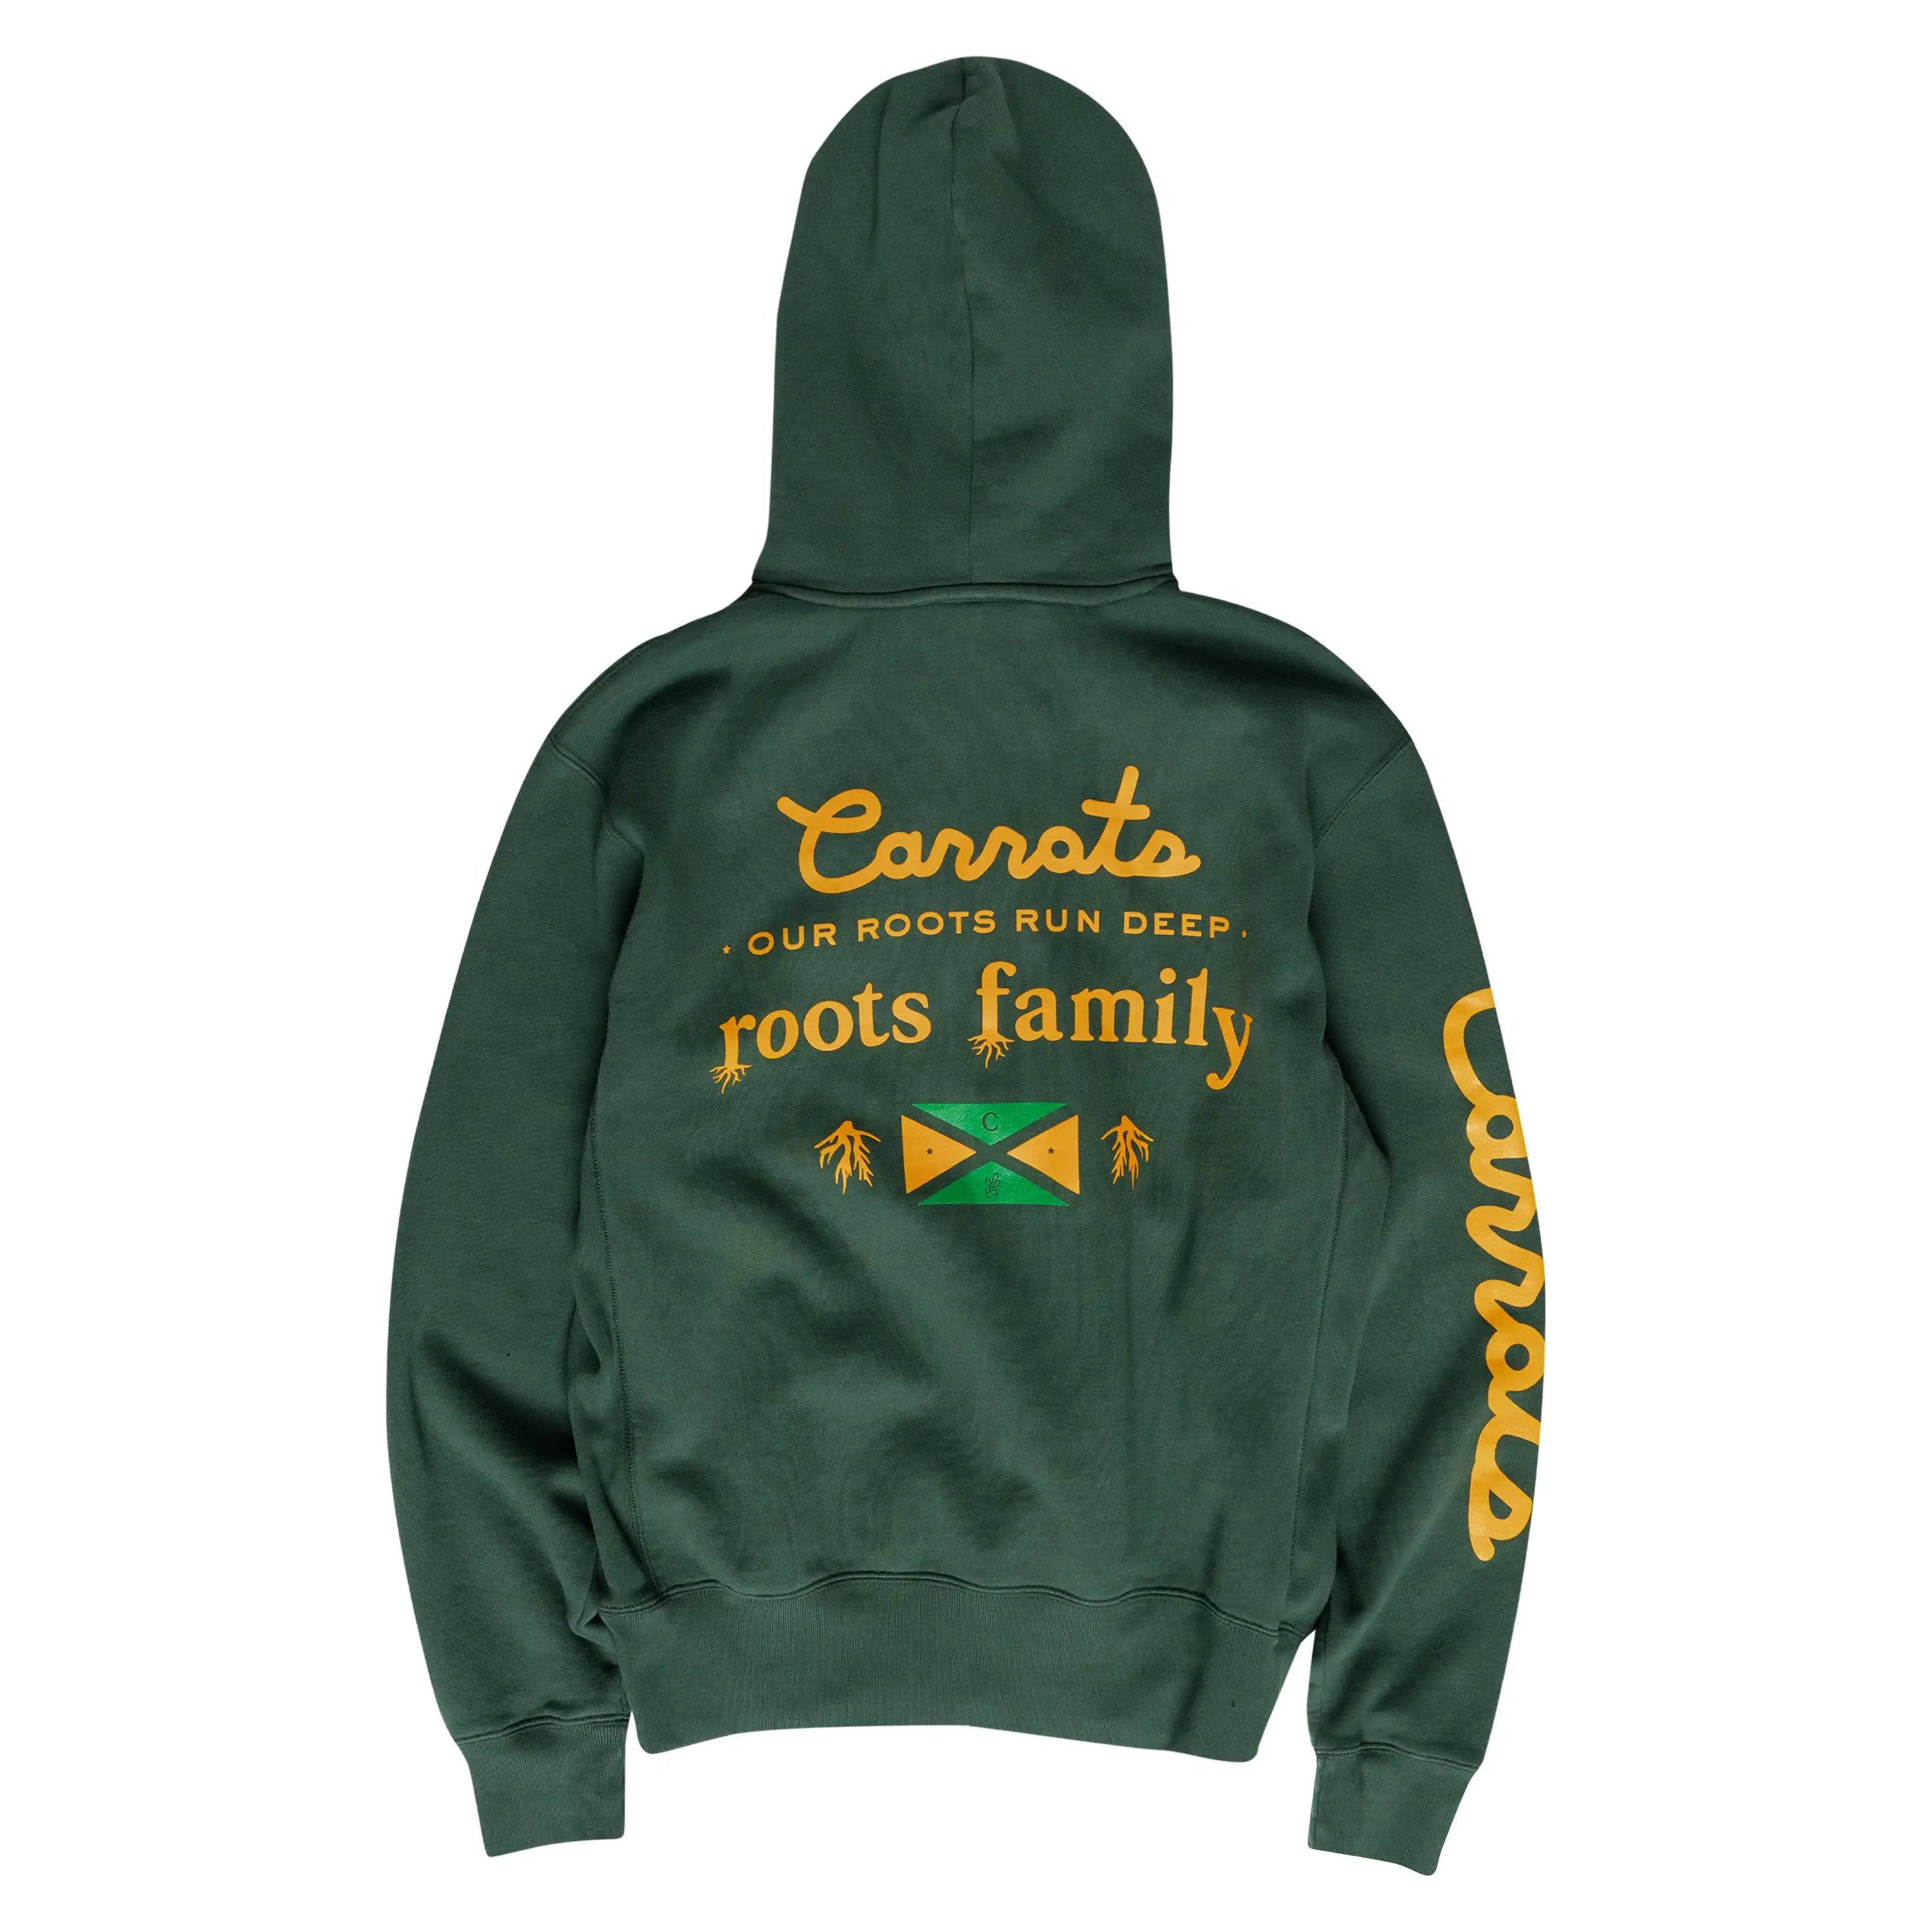 Carrots ROOTS FAMILY HOODED SWEATSHIRT - Forest Green